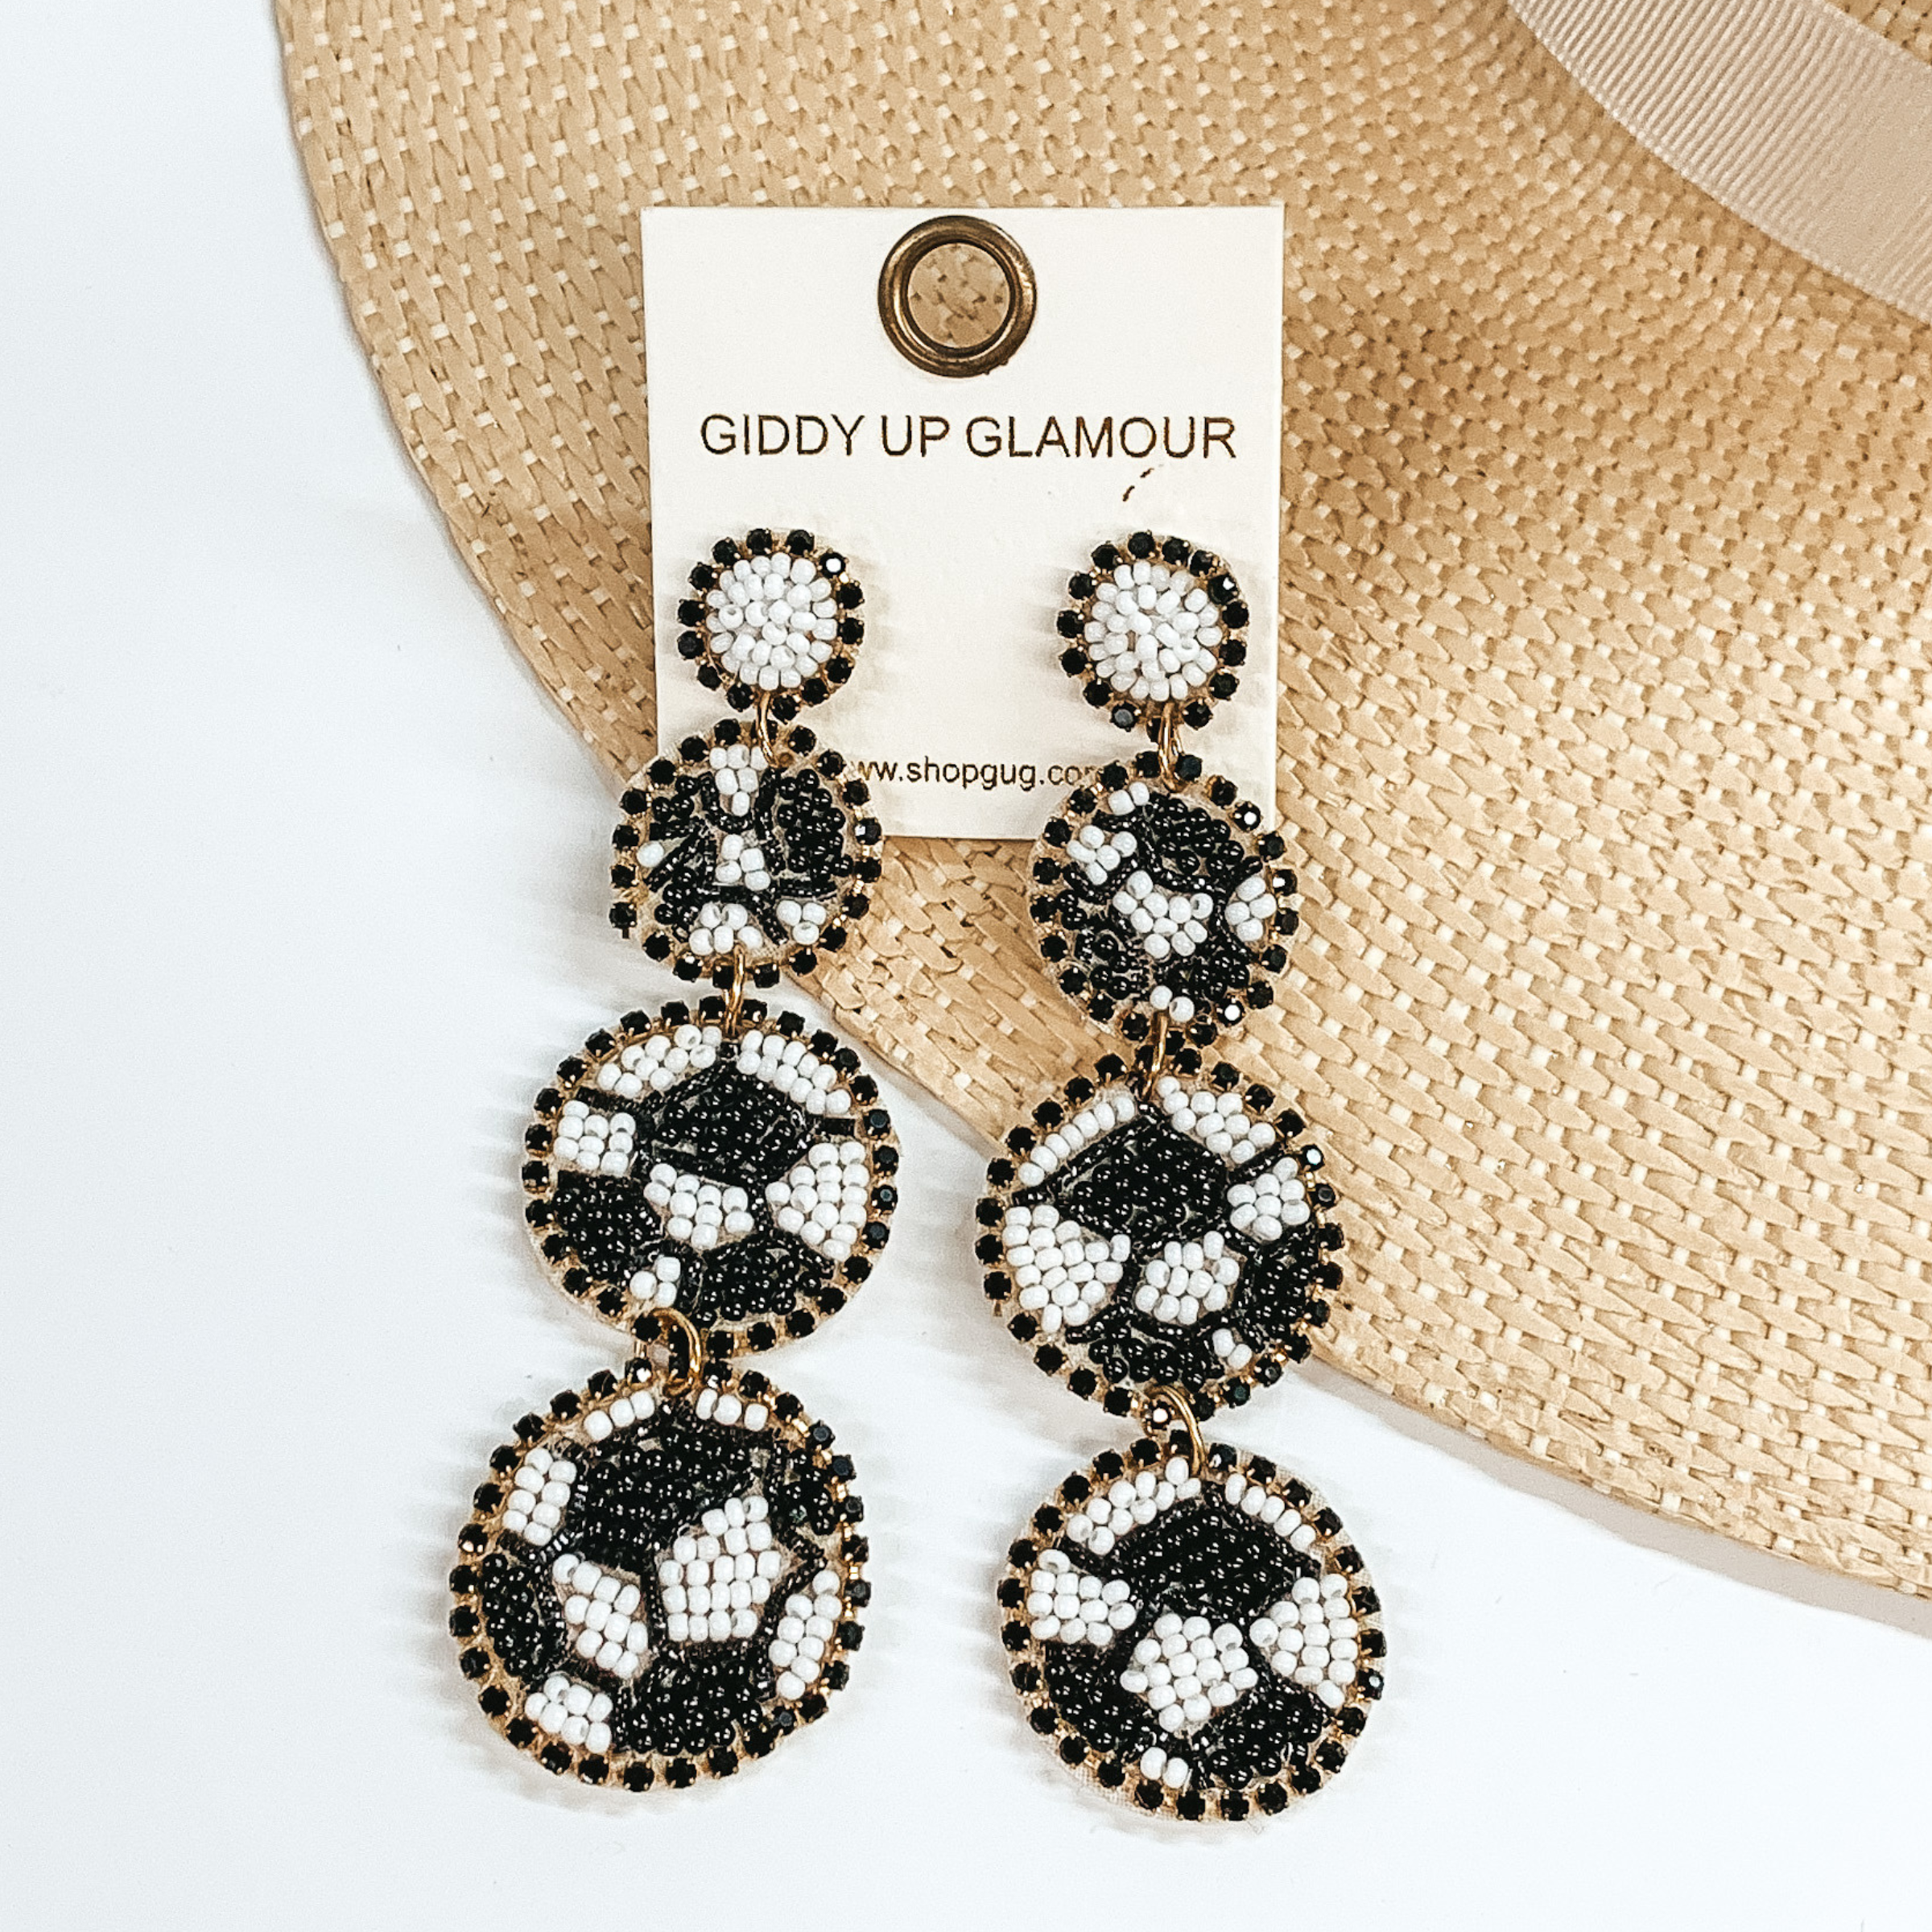 White beaded post back earrings with three beaded soccer ball pendants. These earrings also include a black crystal outline. These earrings are pictured partially laying on a straw hat brim on a white background. 